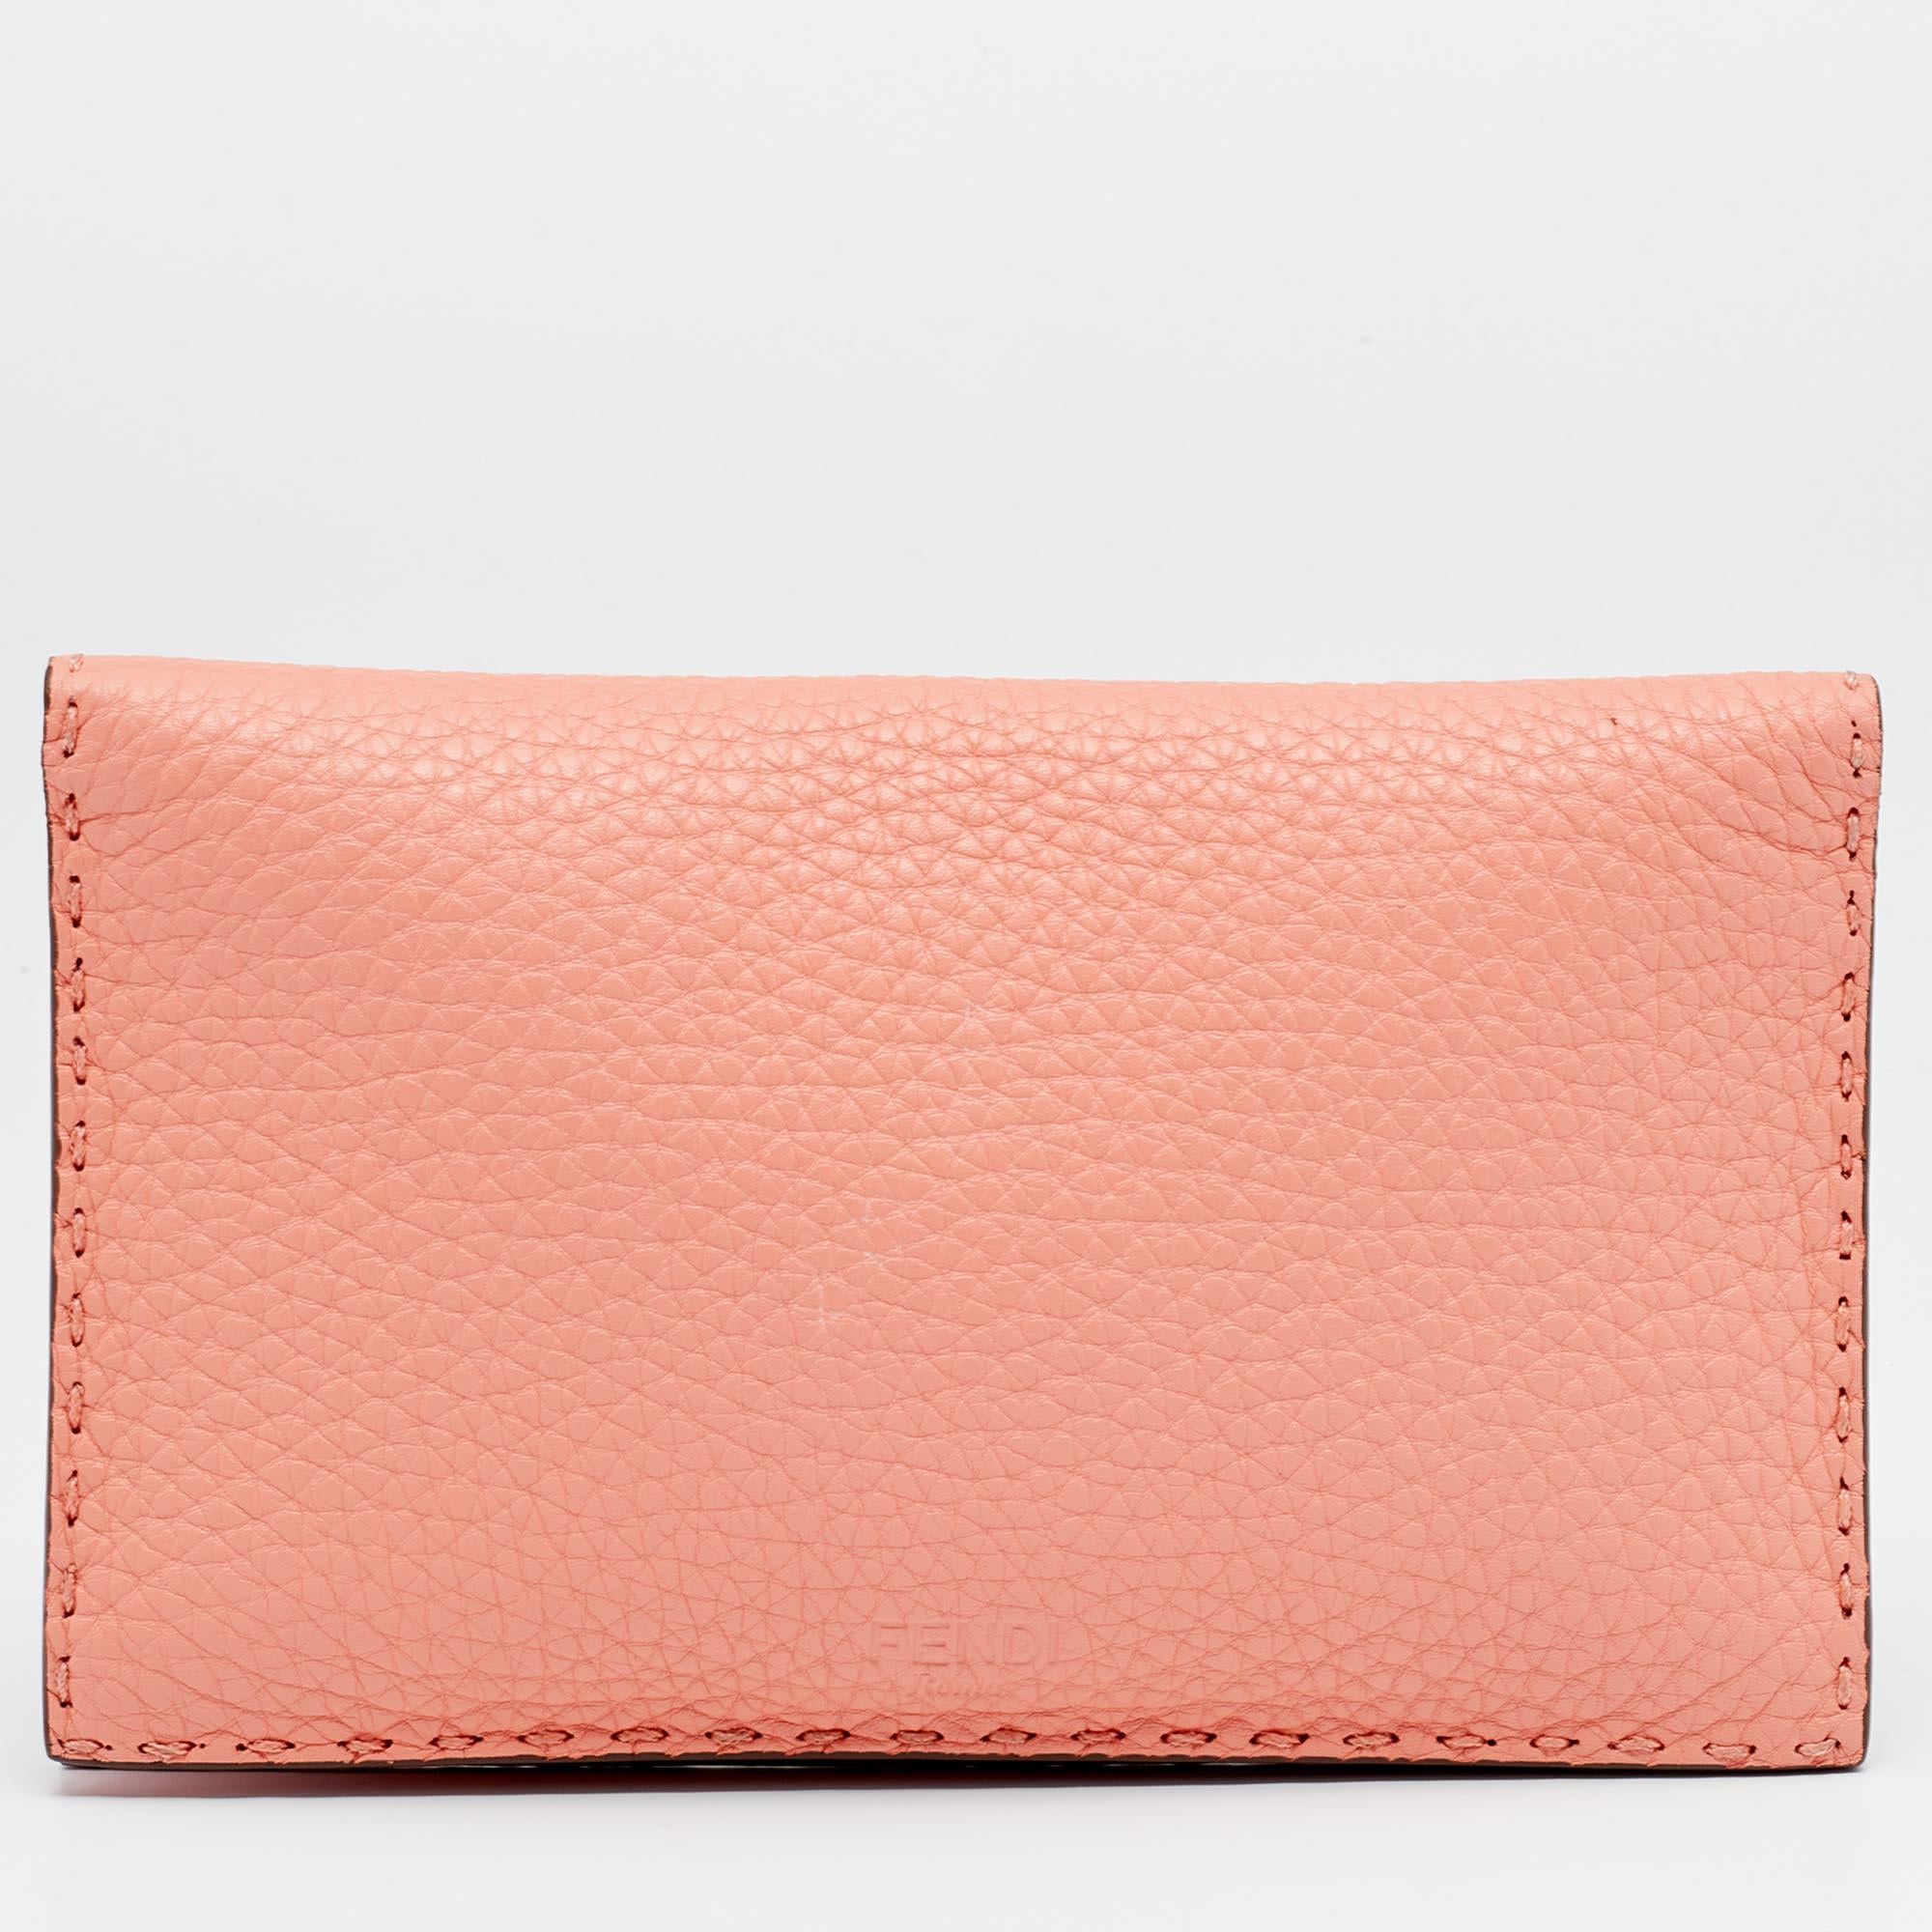 Made using peach leather, this Peekaboo wallet from Fendi has a simple look and functional quality. The exterior has a twist lock and the Selleria motif and the interior has enough space for cards, cash, and receipts.

Includes: Original Dustbag